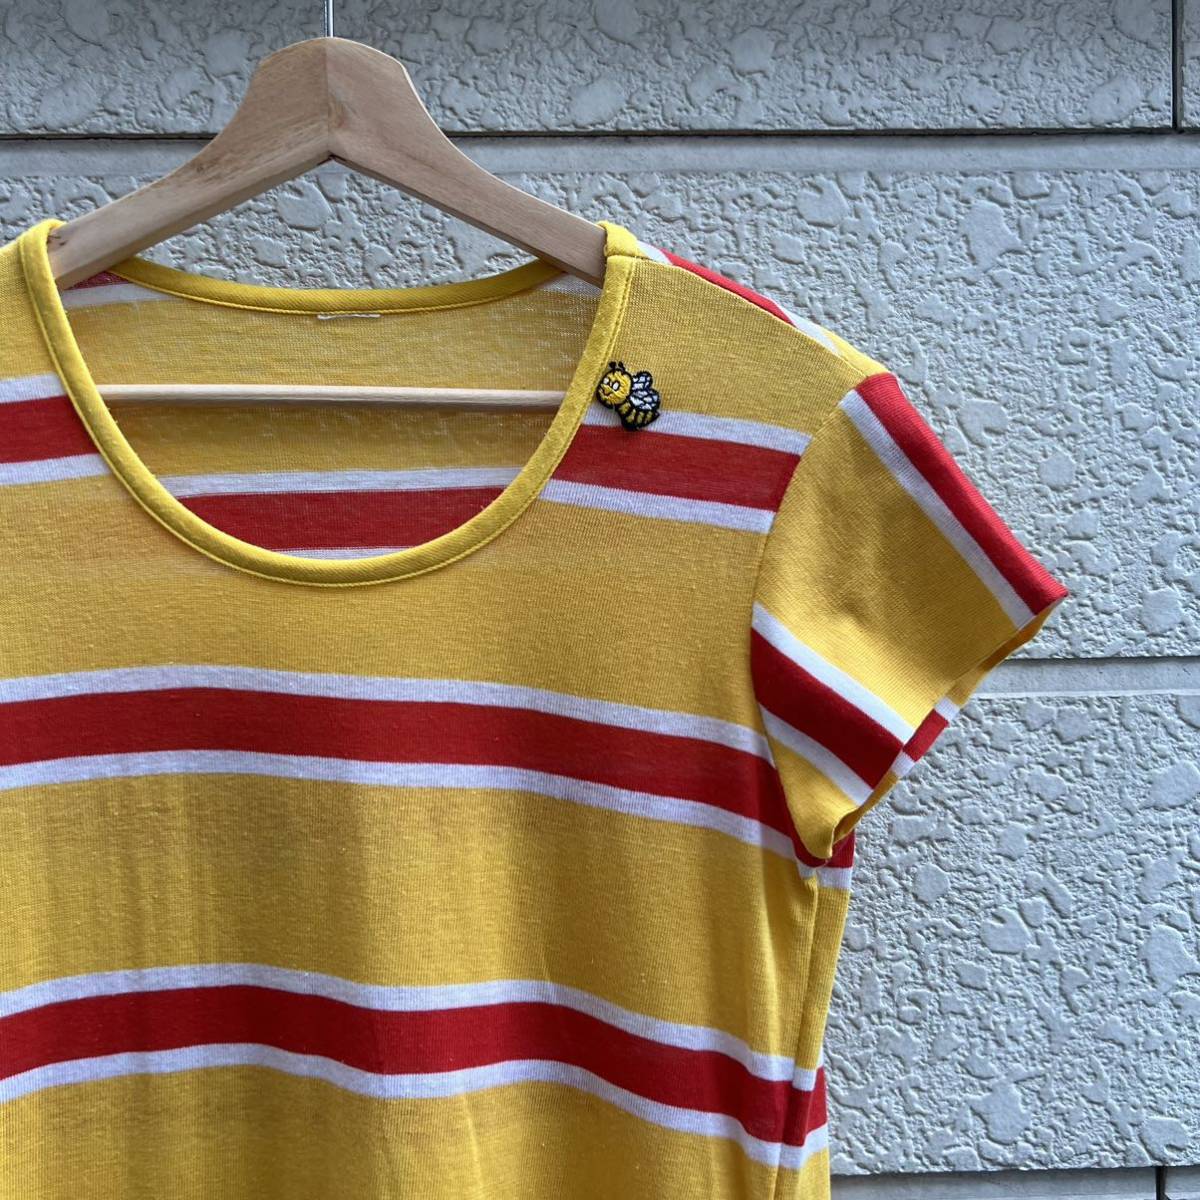 70s 80s USA古着 ボーダー柄 カットソーワンピース ボーダーワンピース Tシャツ アメリカ古着 vintage ヴィンテージ 黄色 イエロー_画像3